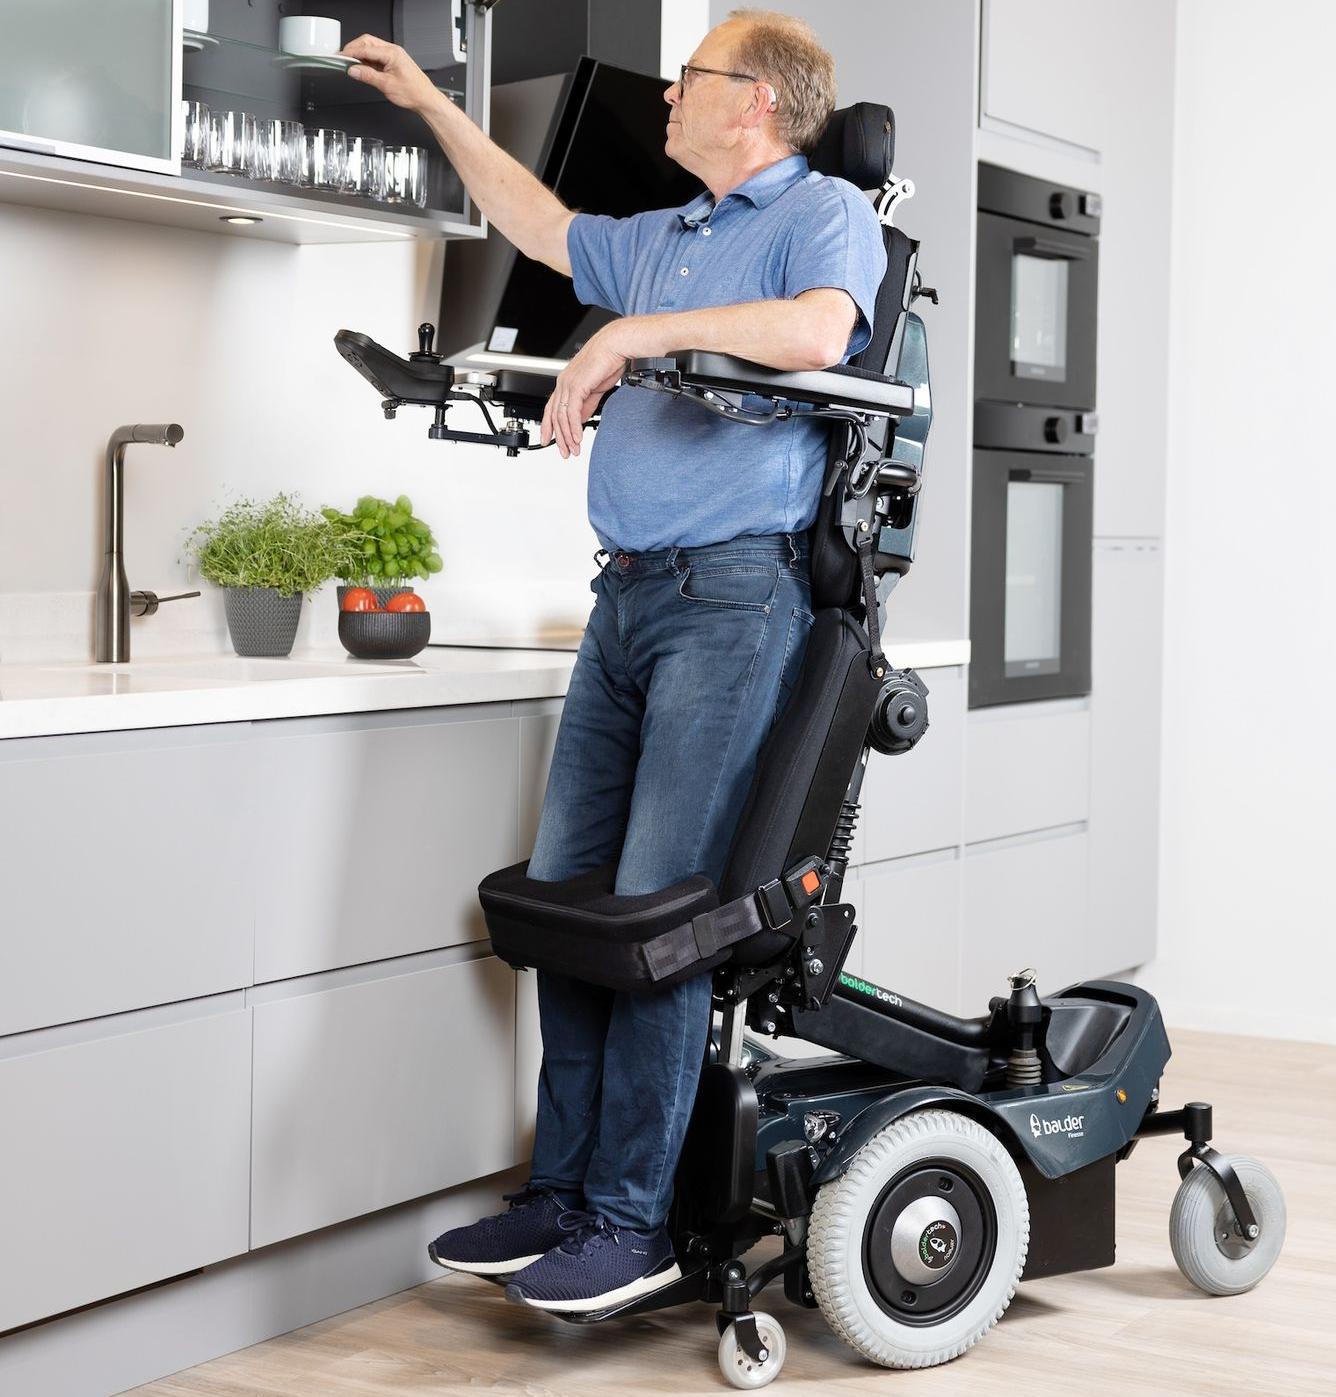 A white male using a Balder F390 standing powerchair. He is in the standing position and reaching into a high cupboard.